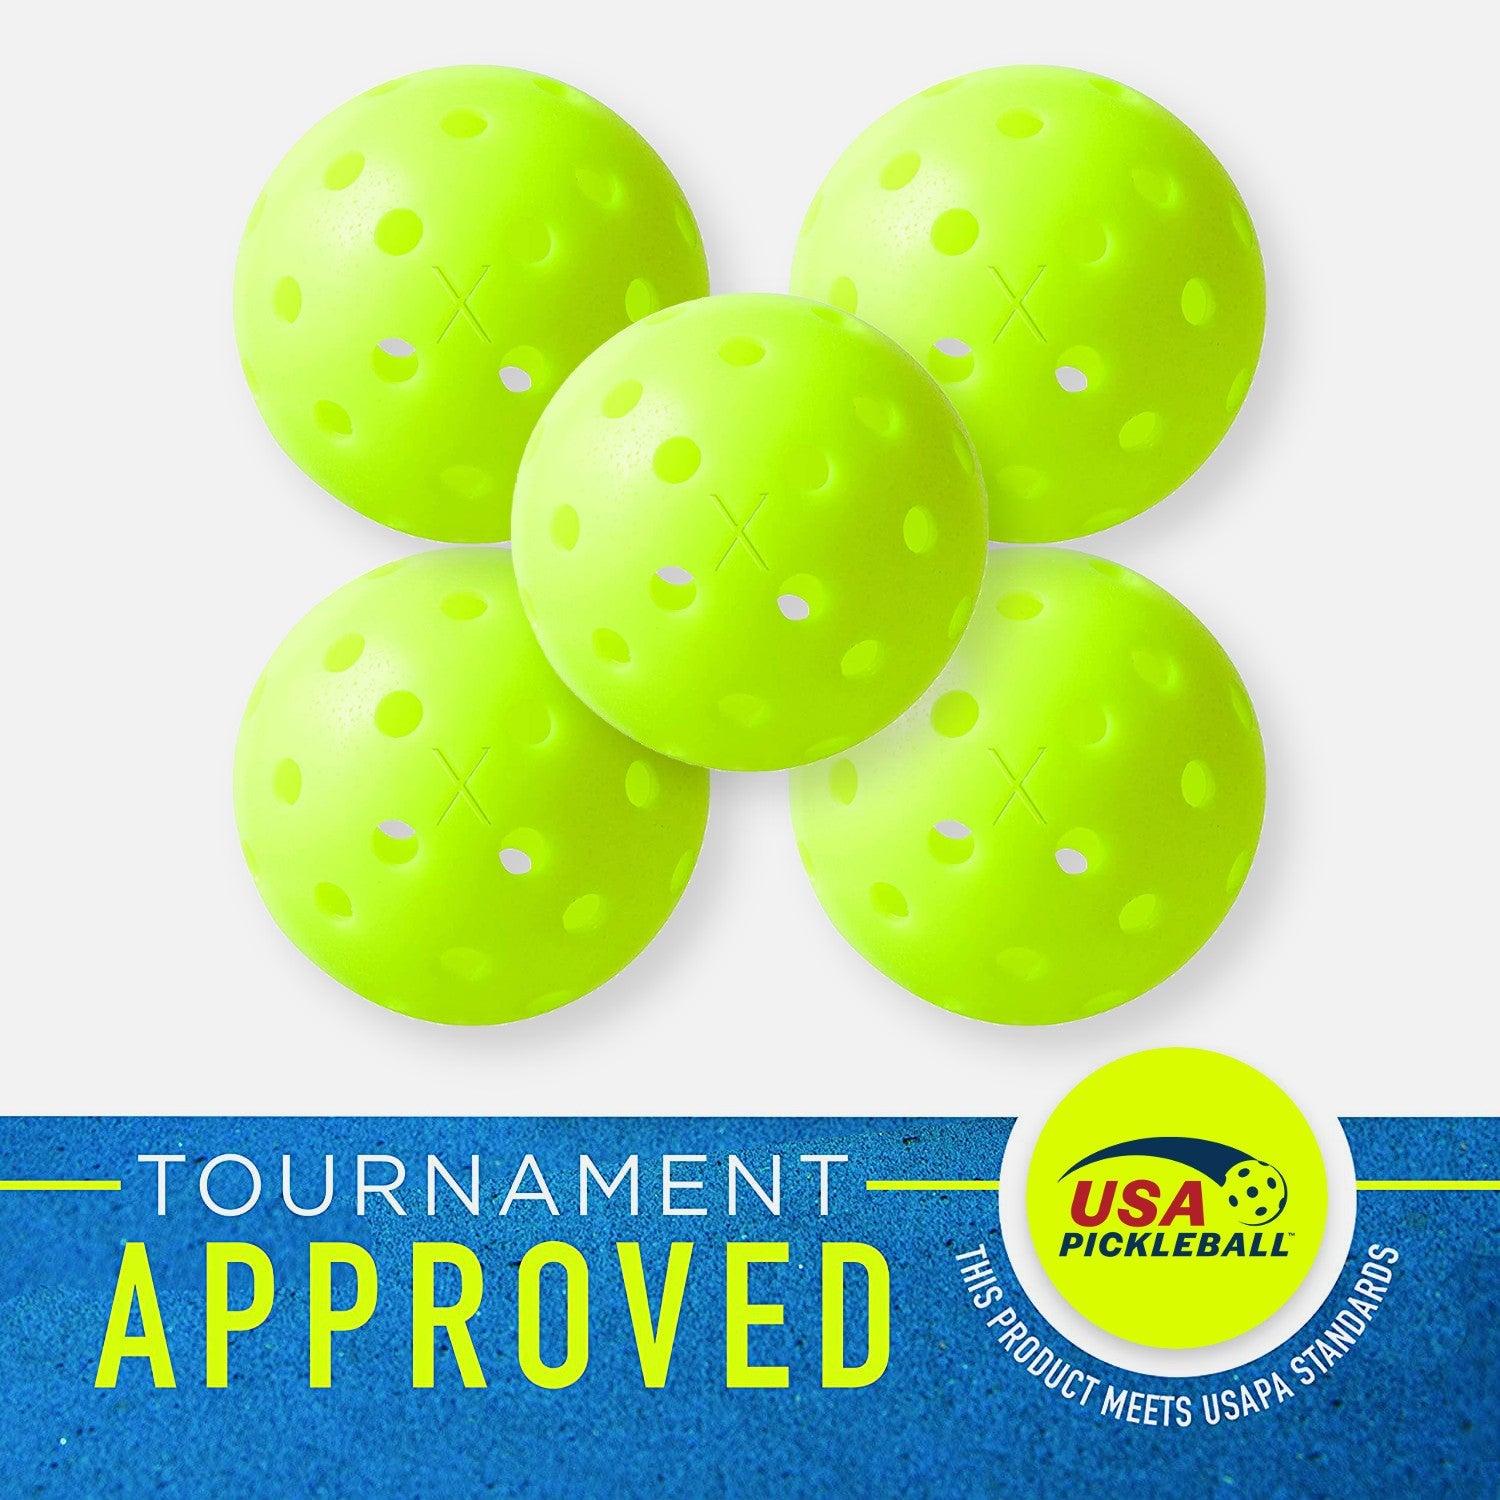 A set of Franklin X-40 Outdoor Pickleball Balls with the words tournament approved.